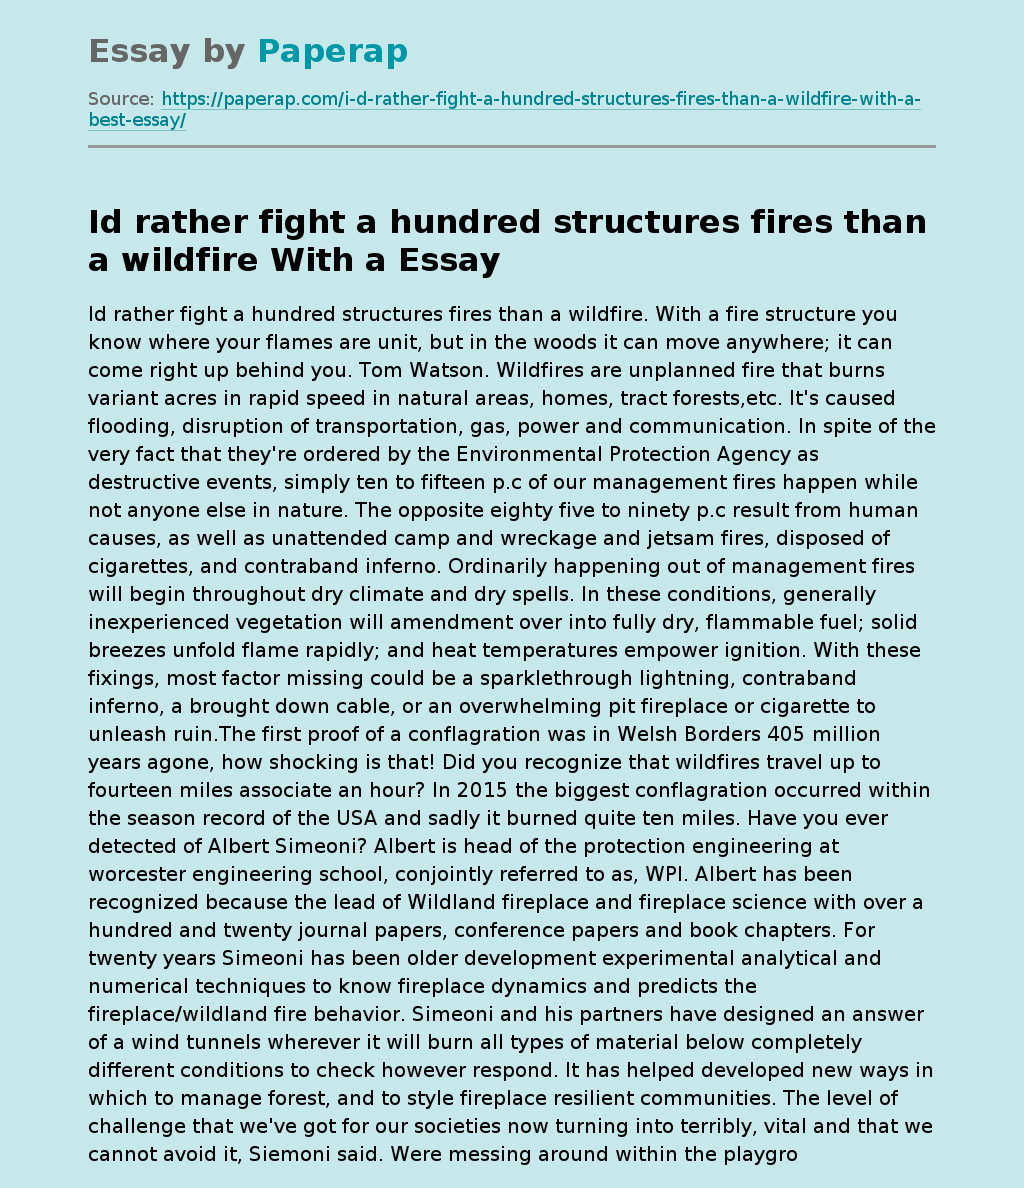 The Impact of Human Activities and Natural Factors on Wildfires